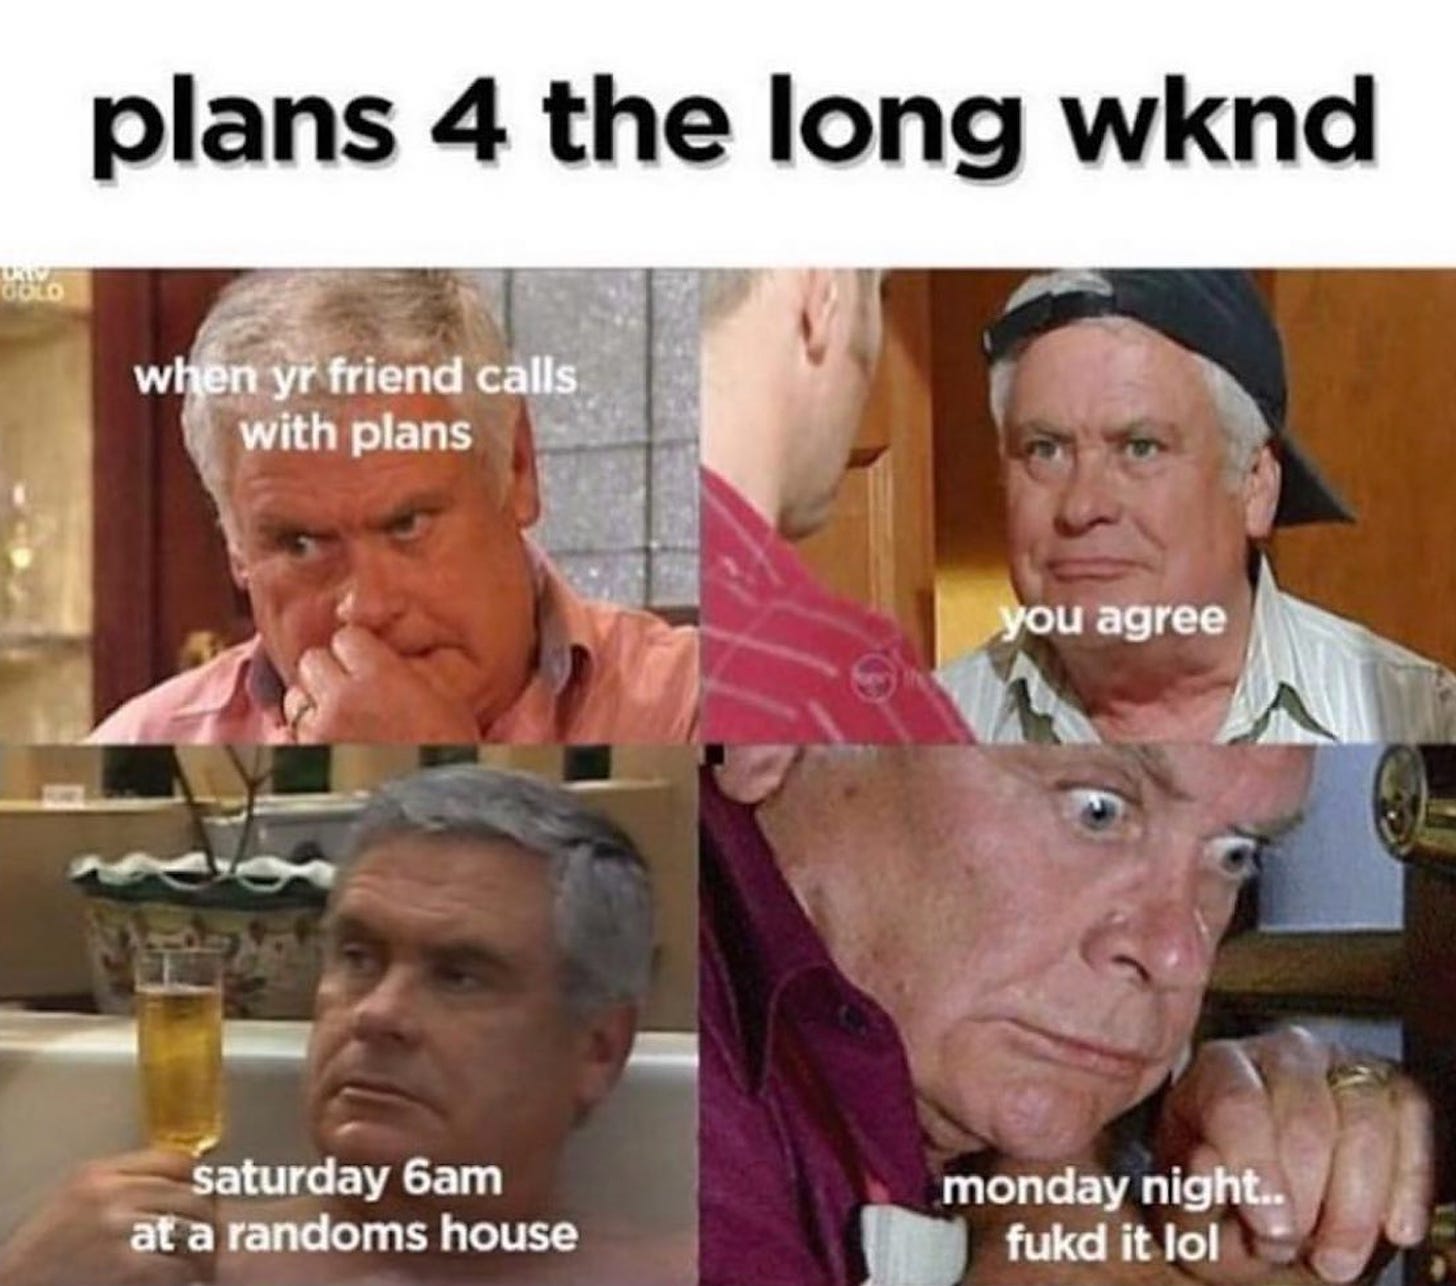 A quarter of images featuring Lou Carpenter from Neighbours, an older white man with grey hair. The title is Plans 4 the long weekend. In the first image, he is wearing an orange shirt and biting his nails. The copy says when yr friend calls with plans. In the second image, he is wearing a black baseball hat reversed with a green striped shirt and has an expression on his face like he is agreeing with someone. The copy says you agree. In the third image, Lou is relaxing in a hot tub with a glass of champagne. The copy says Saturday 6am at a randoms house. The fourth image shows Lou in a purple shirt looking extremely concerned. The copy says monday night…fukd it, lol